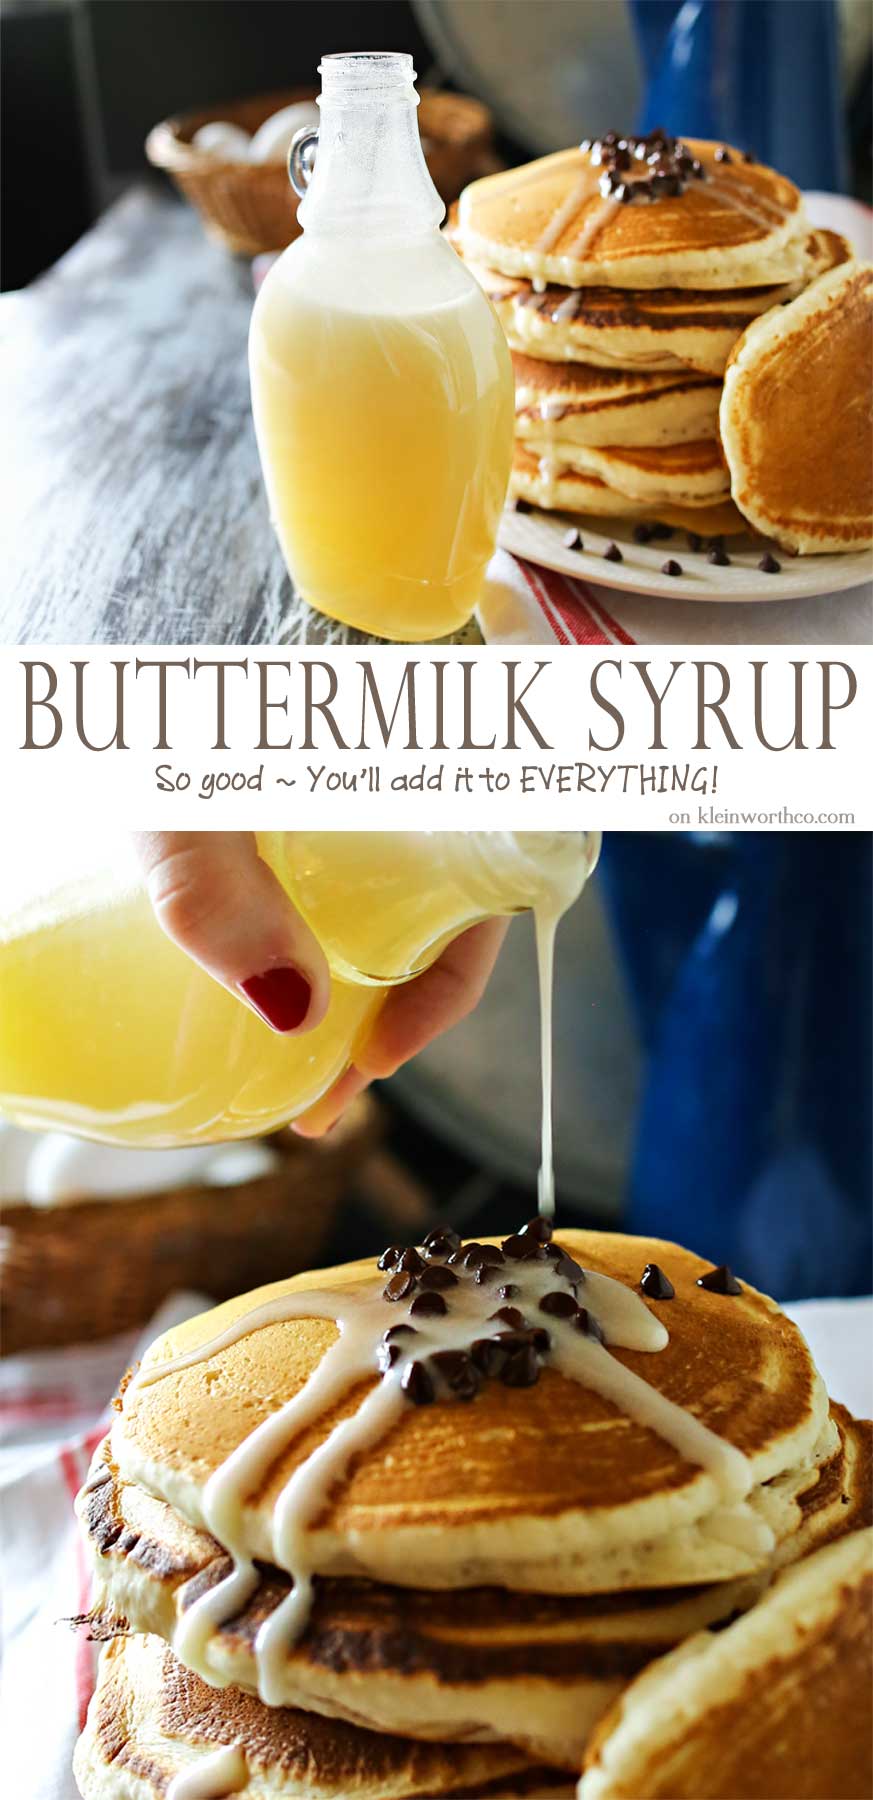 Homemade Buttermilk Syrup is a perfect topping for more than just pancakes. With 5 ingredients & a few minutes you can create this favorite classic recipe. I love to add it to ice cream or even in my morning coffee to add depth & richness. You don't need to buy the prepackaged version anymore. This is so much better! Try some this weekend! 